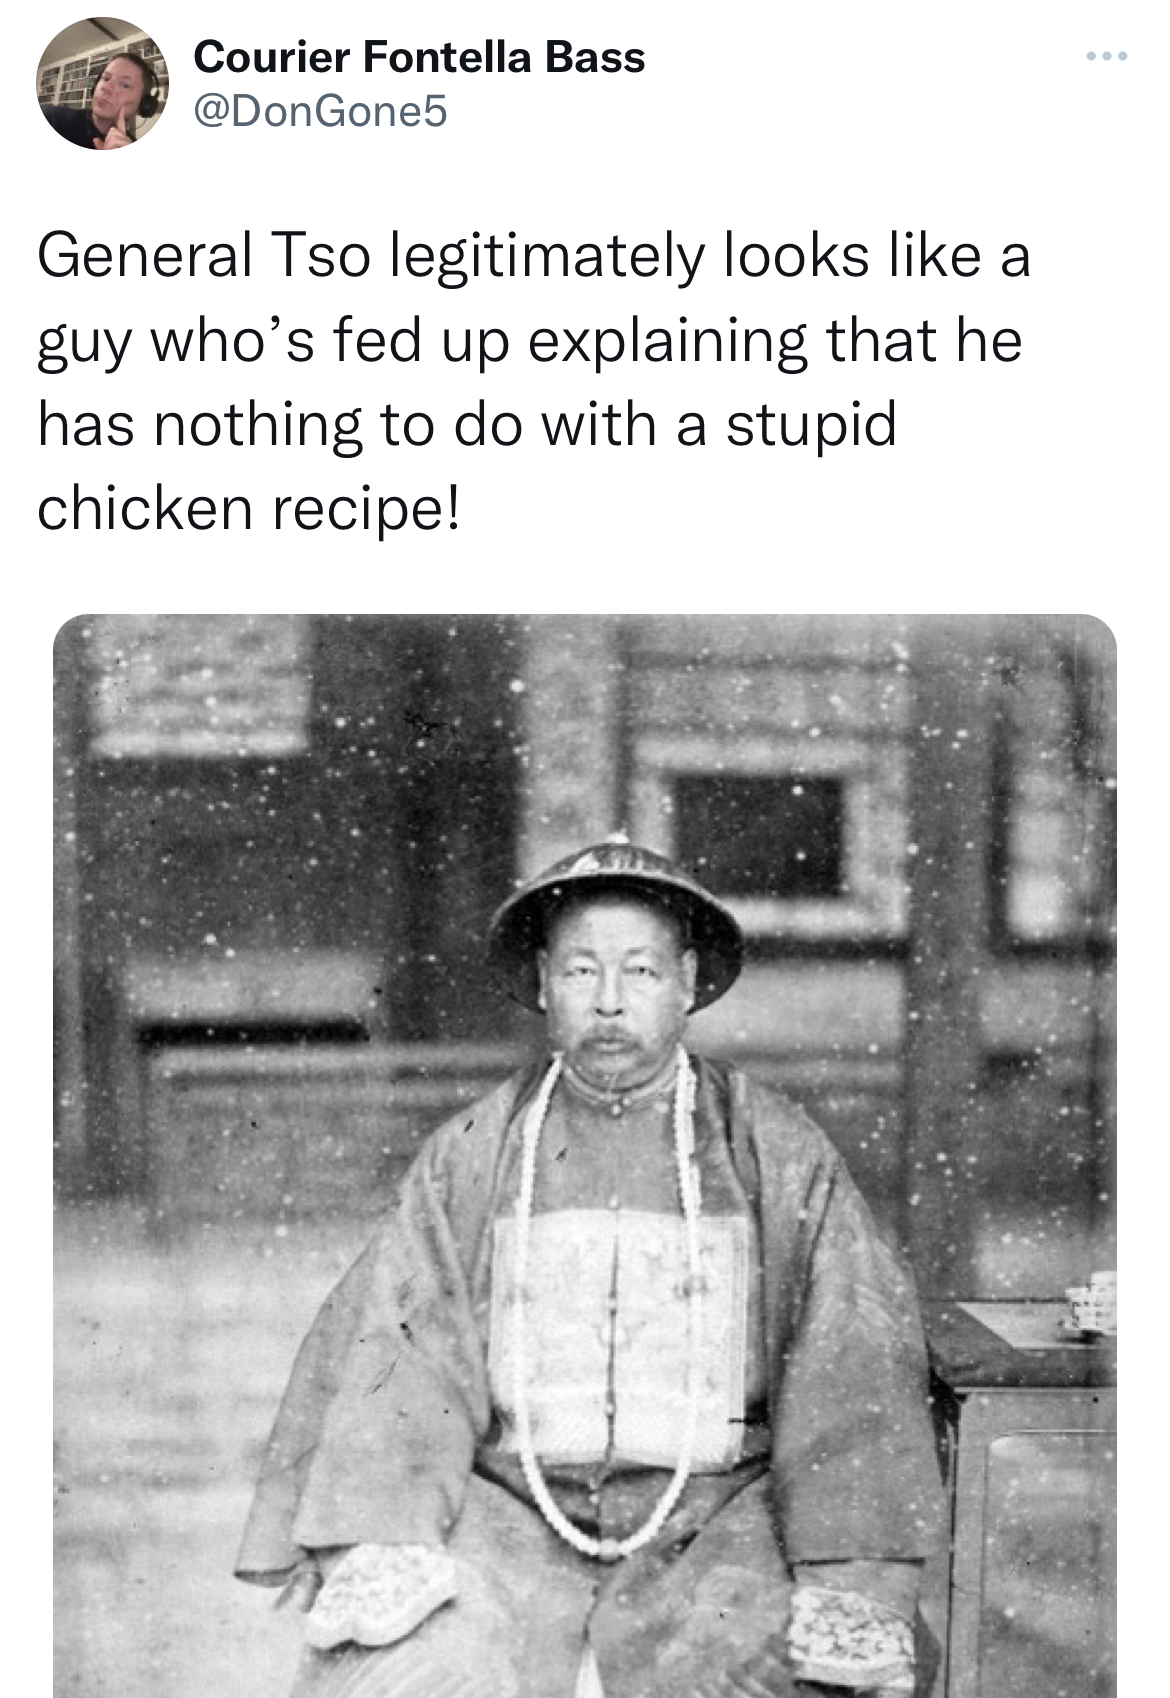 savage and absurd tweets - Courier Fontella Bass General Tso legitimately looks a guy who's fed up explaining that he has nothing to do with a stupid chicken recipe!